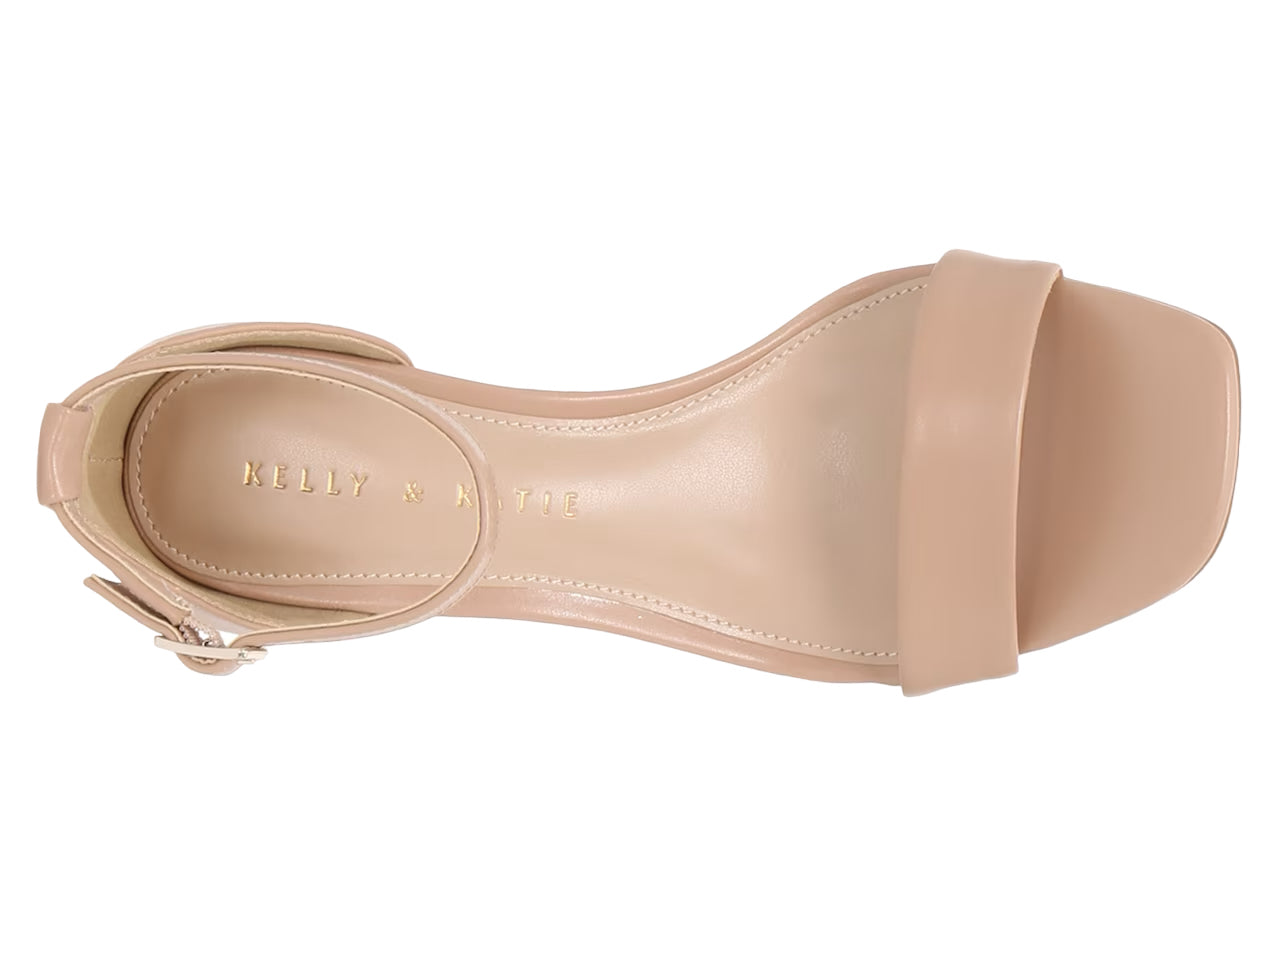 KELLY & KATIE NUDE ANKLE STRAP BARELY THERE SANDAL